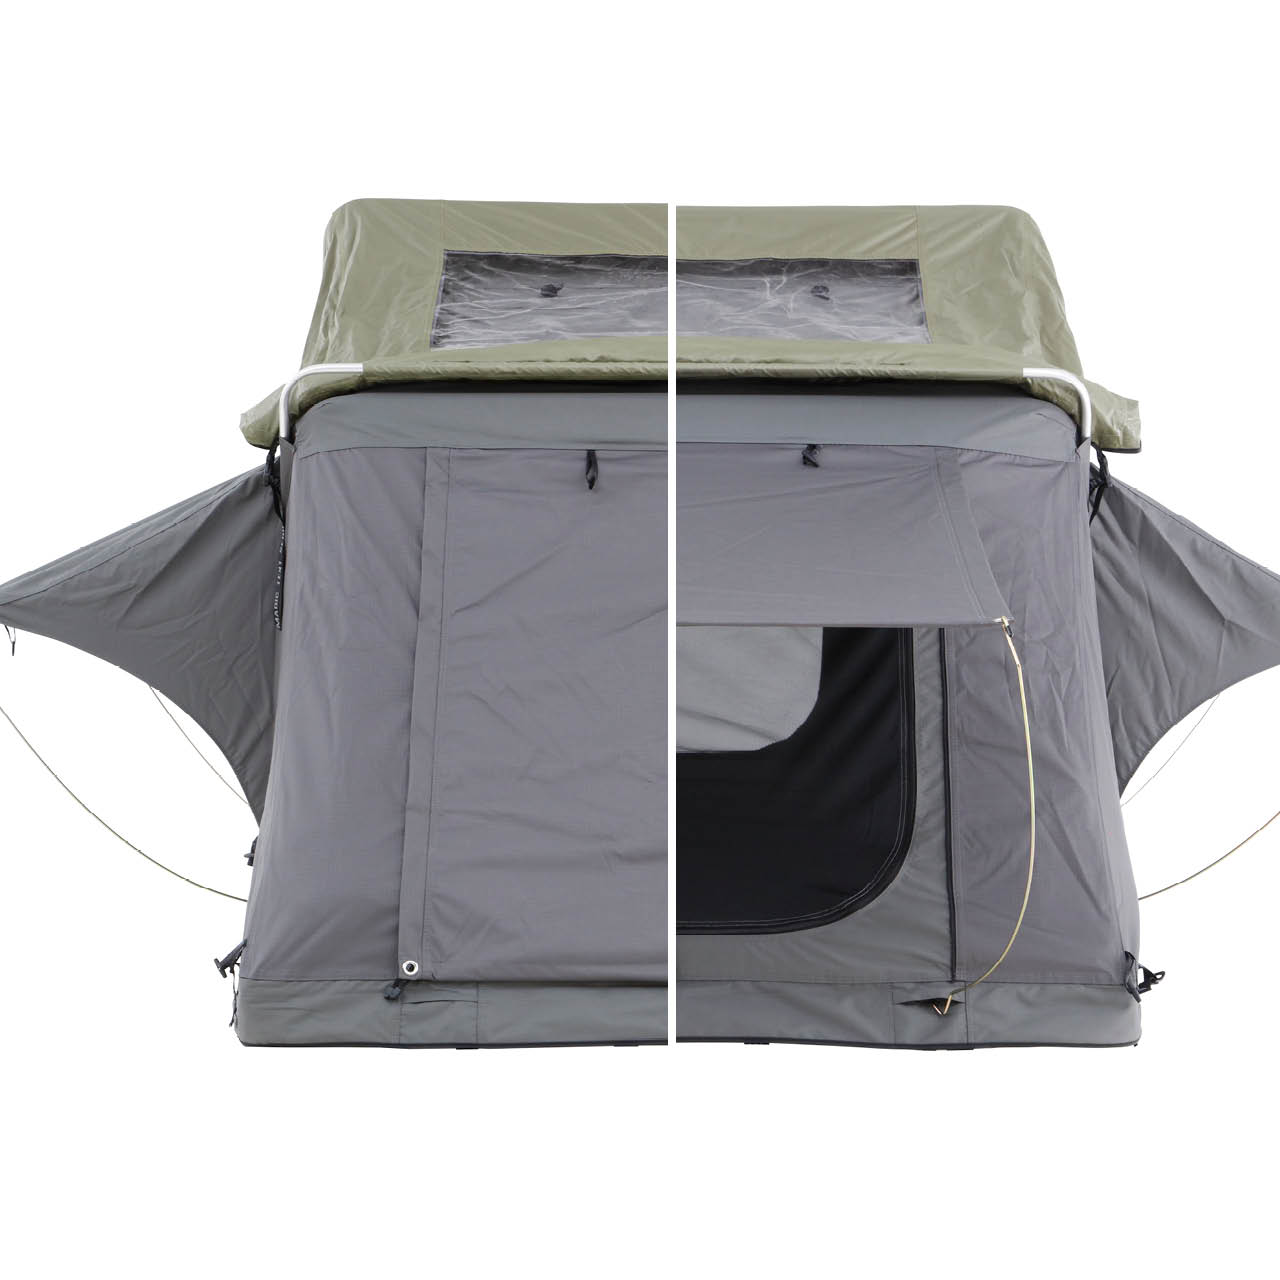 Nomadic N2E - Soft Sided Roof Top Tent, 2 Person, Grey Body & Green Rainfly